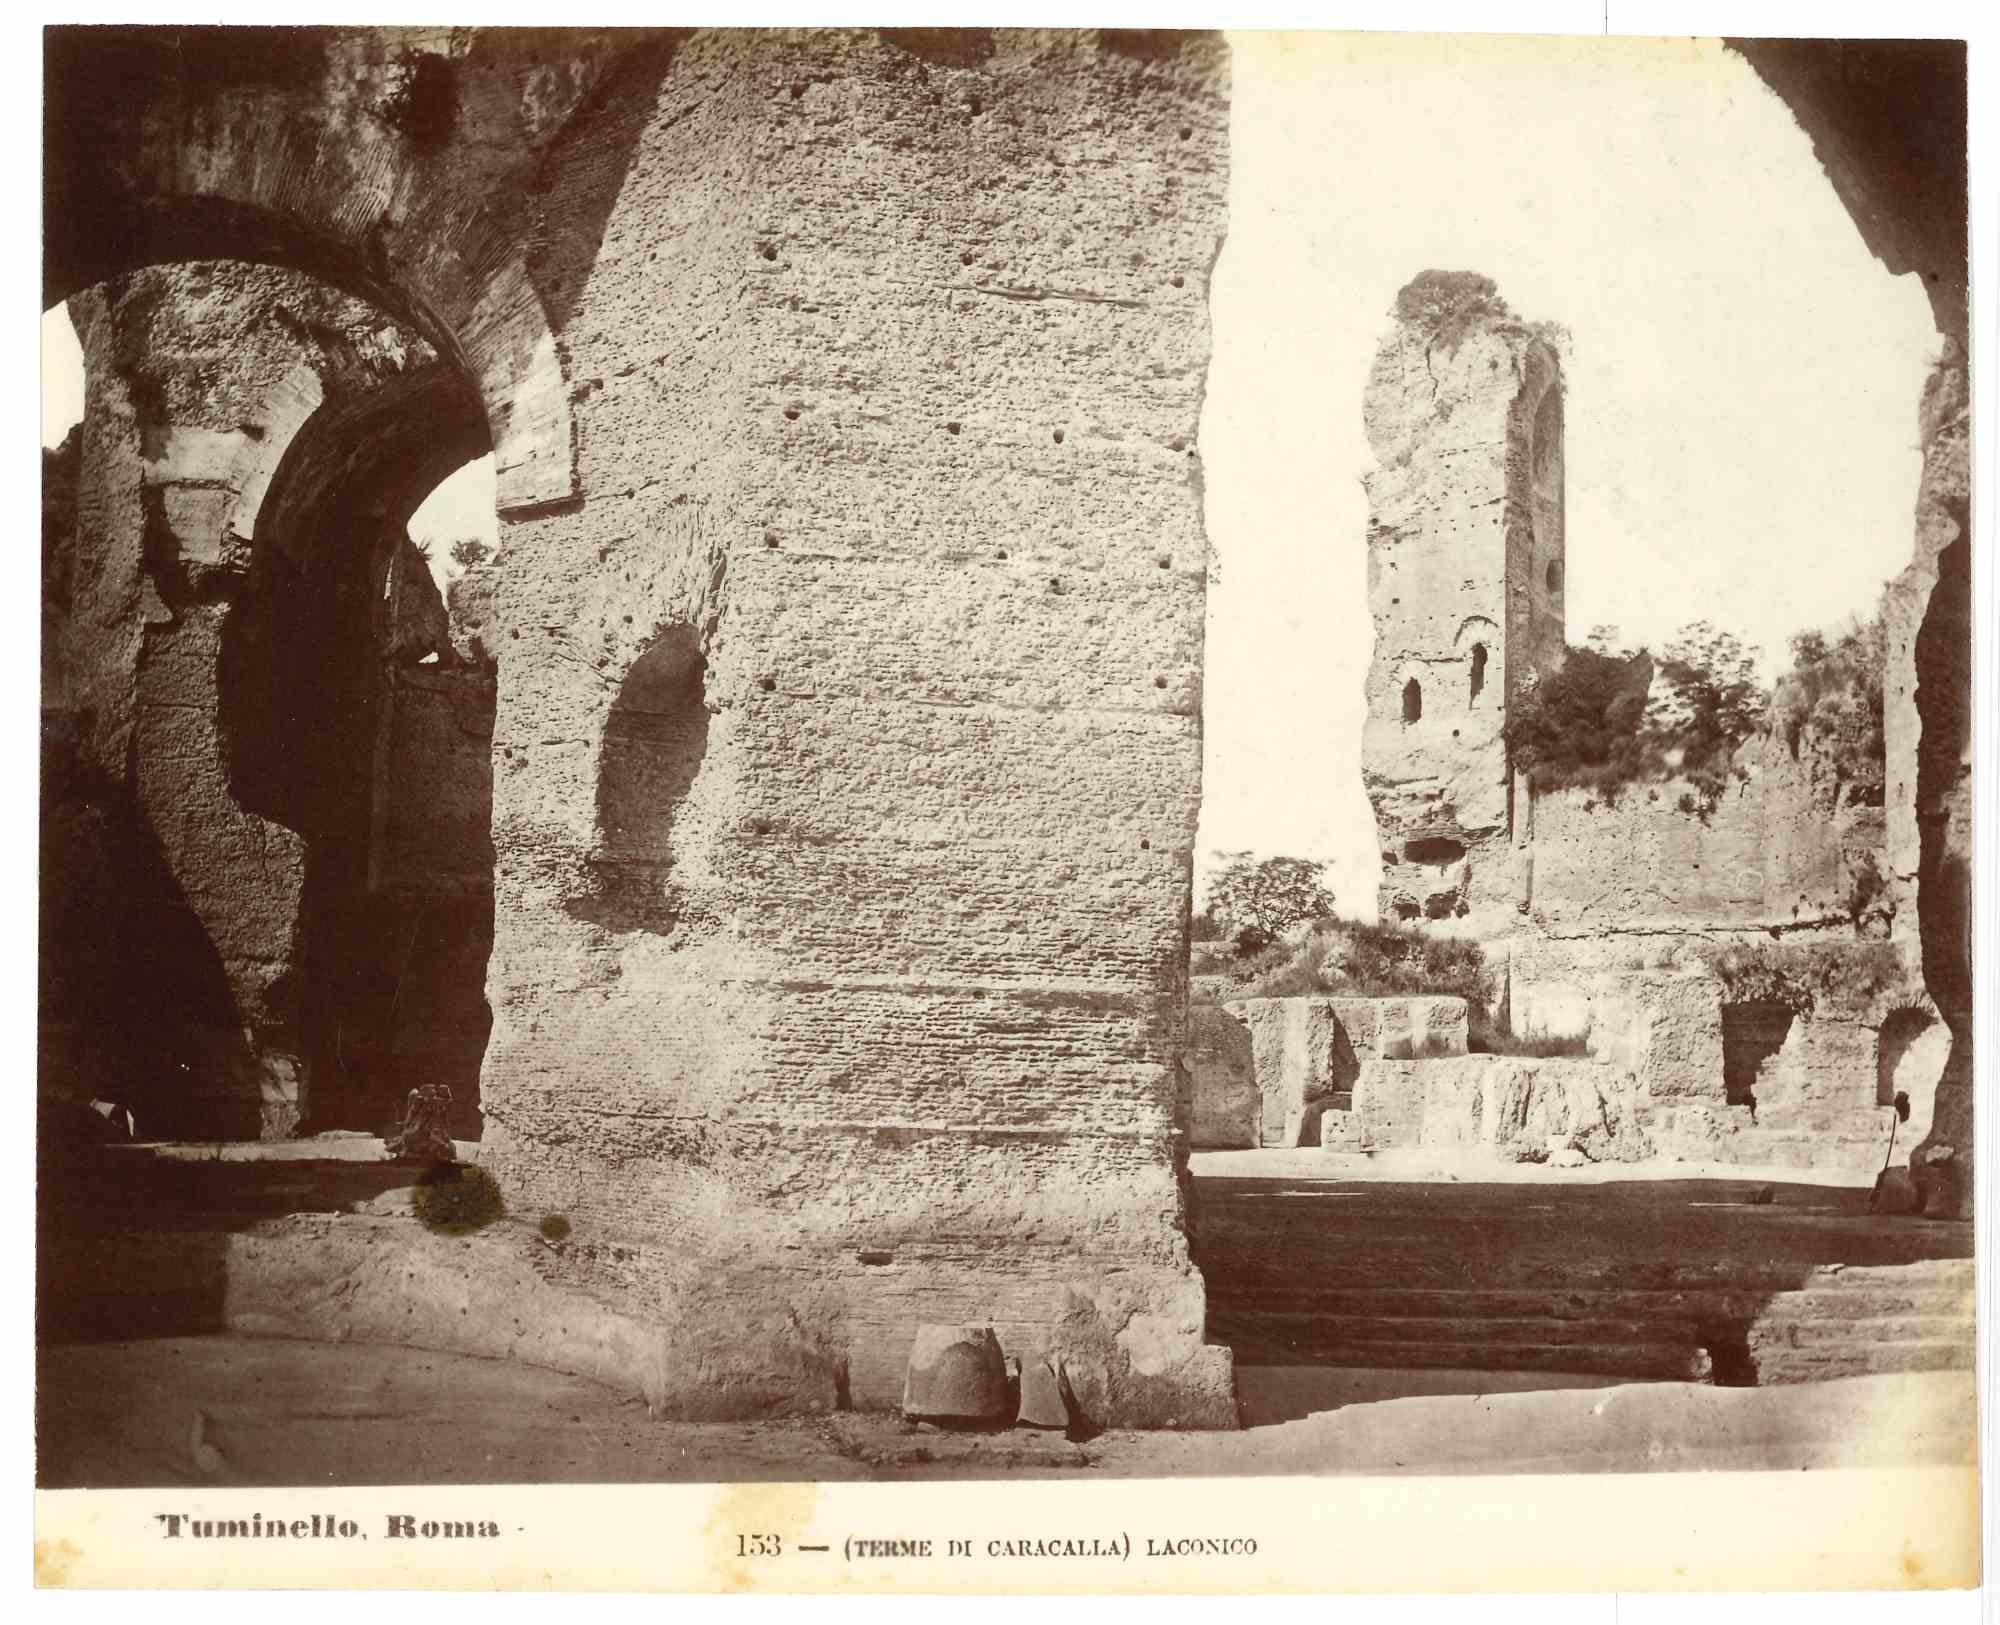 Baths of Caracalla is a vintage print in salt silver realized by Ludovico Tuminello in the early 20th Century.

Titled on the lower.

Good conditions with some foxing.